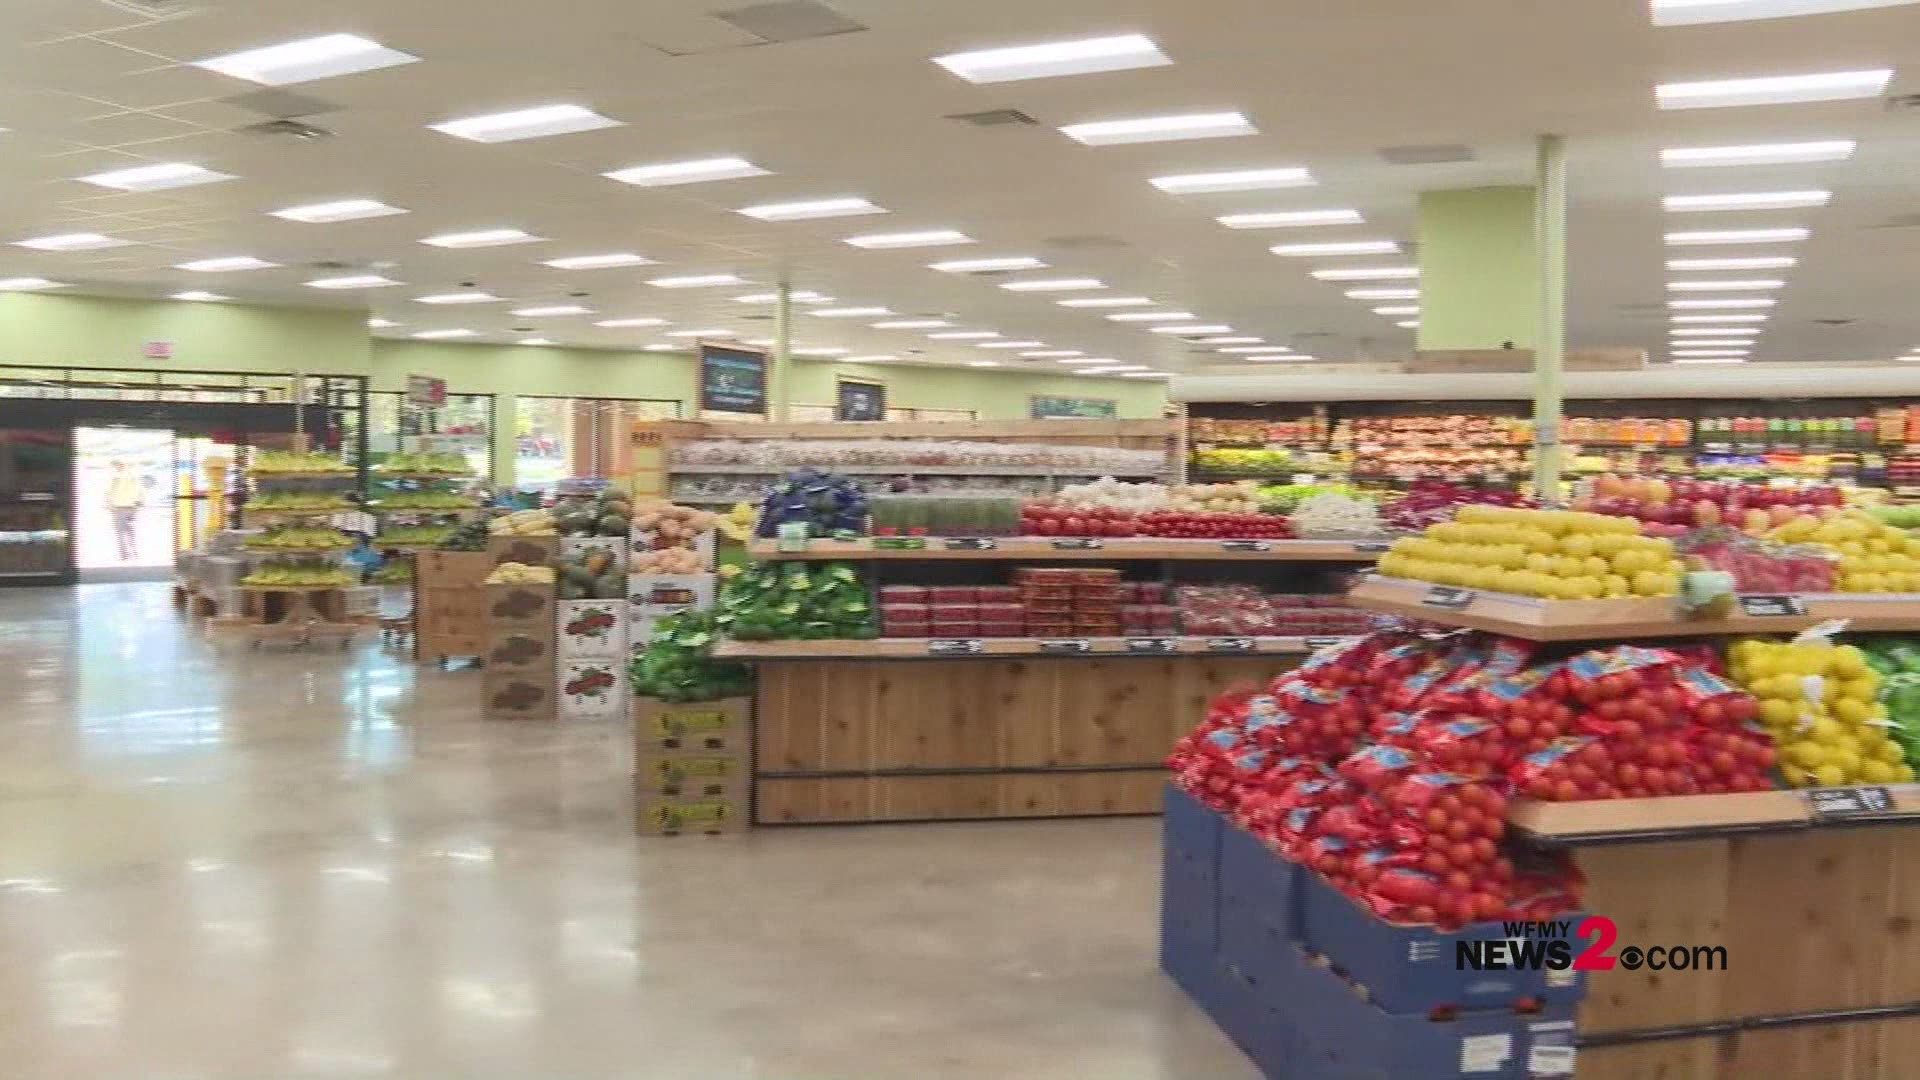 The grocery store opens Thursday, October 24 on Battleground Avenue.